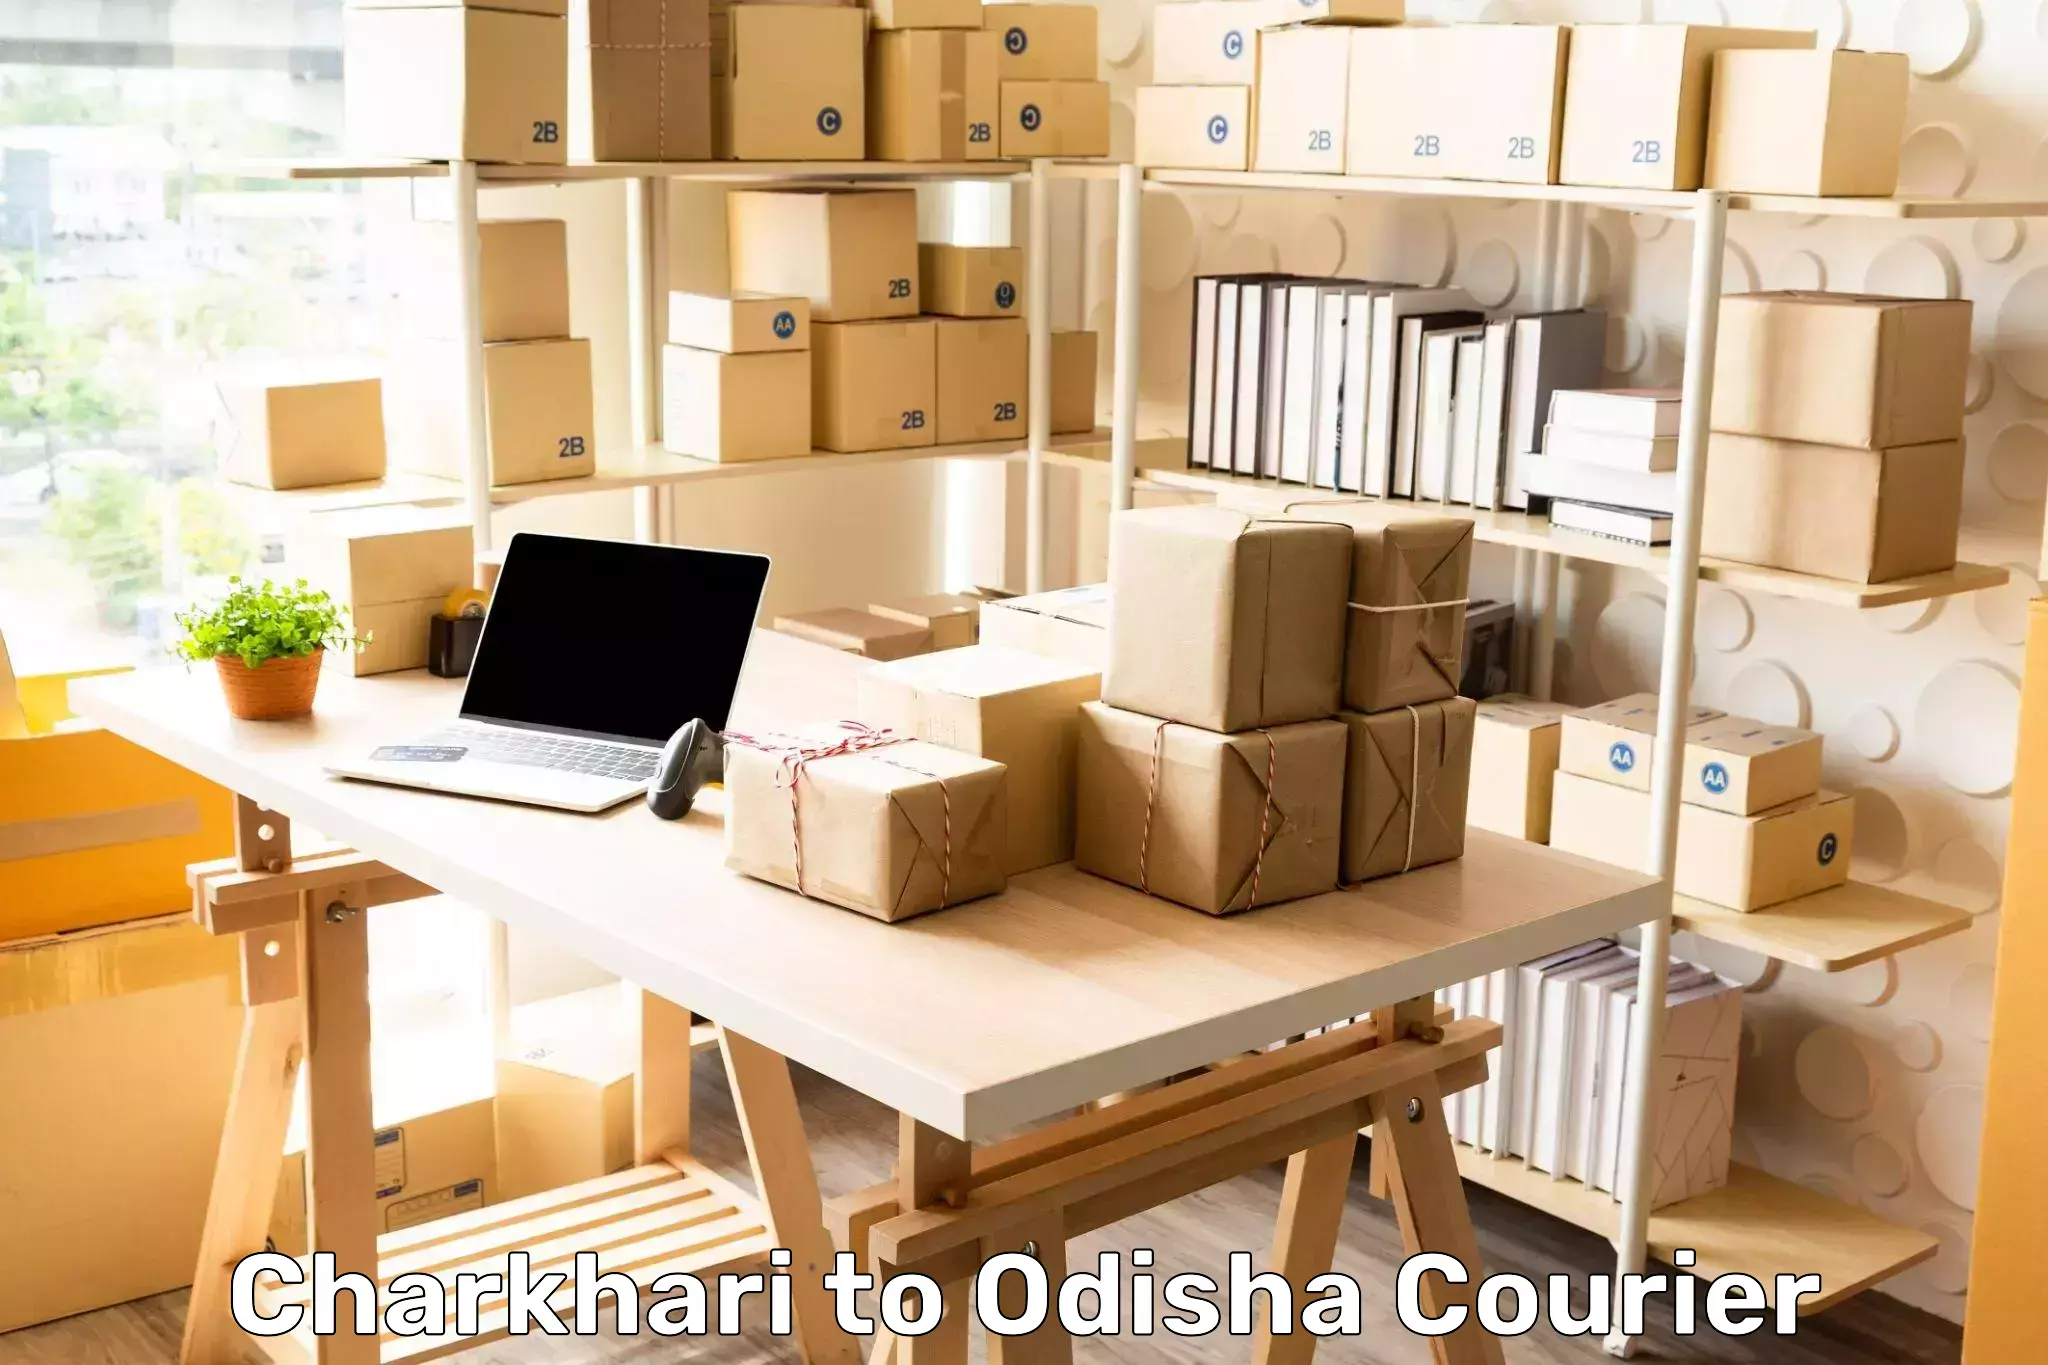 Courier dispatch services Charkhari to Nabarangpur